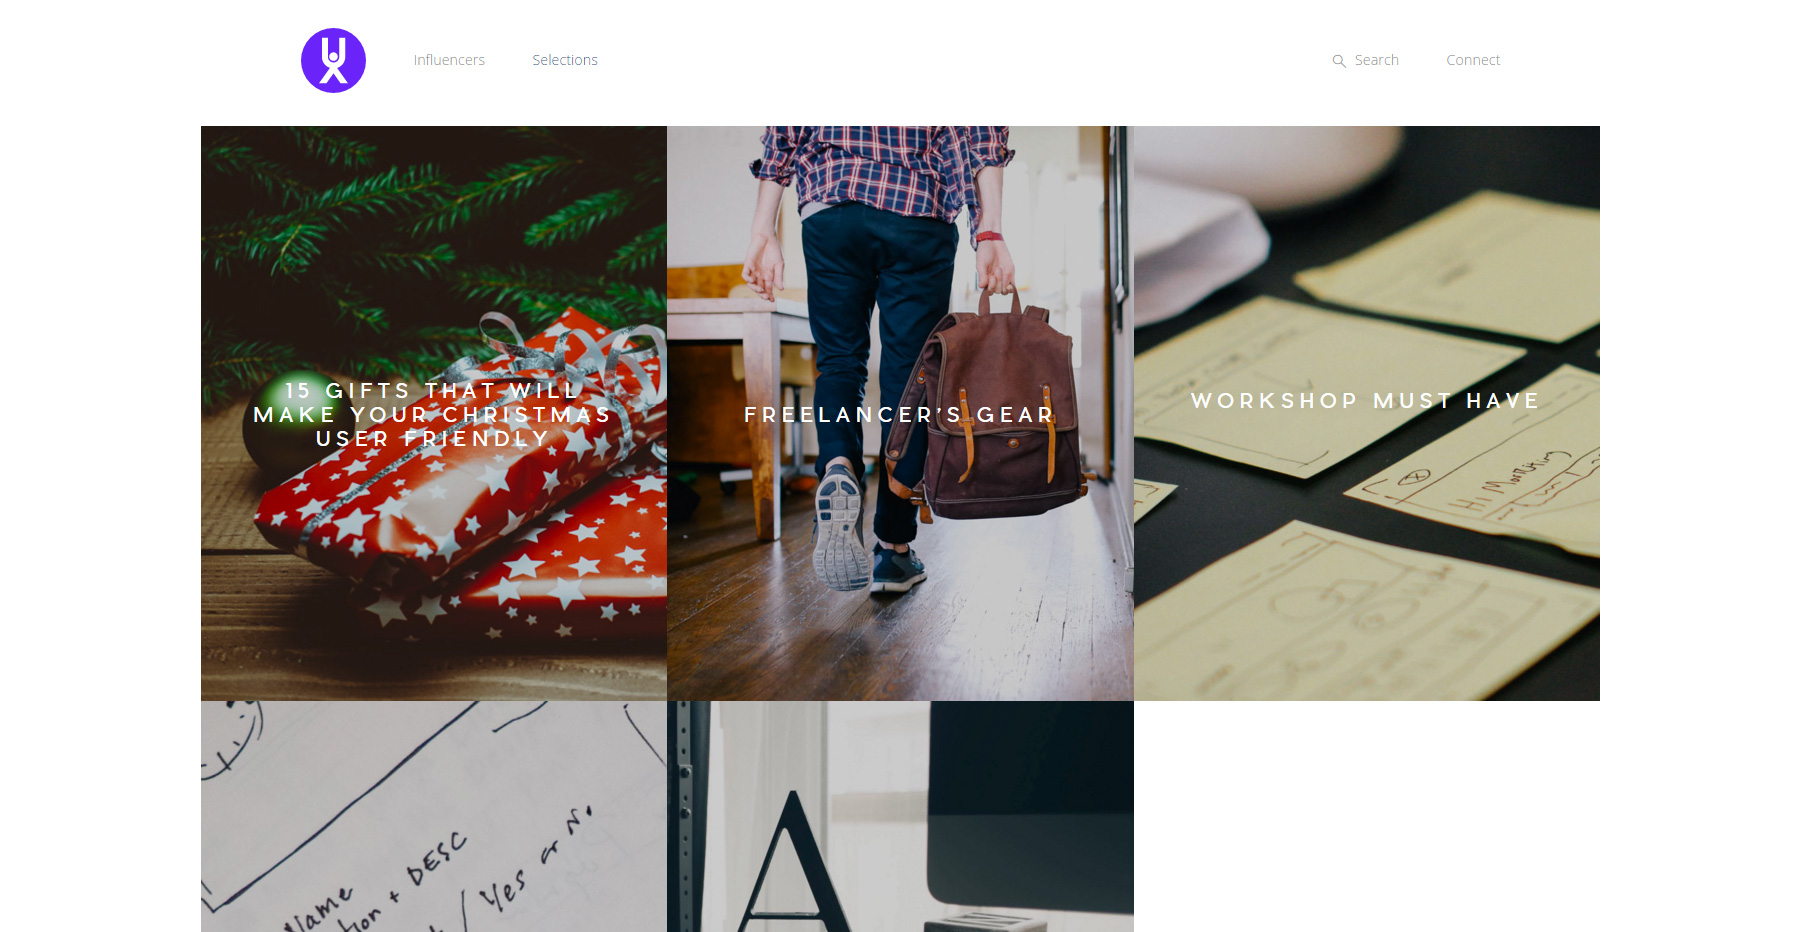 The UX Shop - Website of the Day